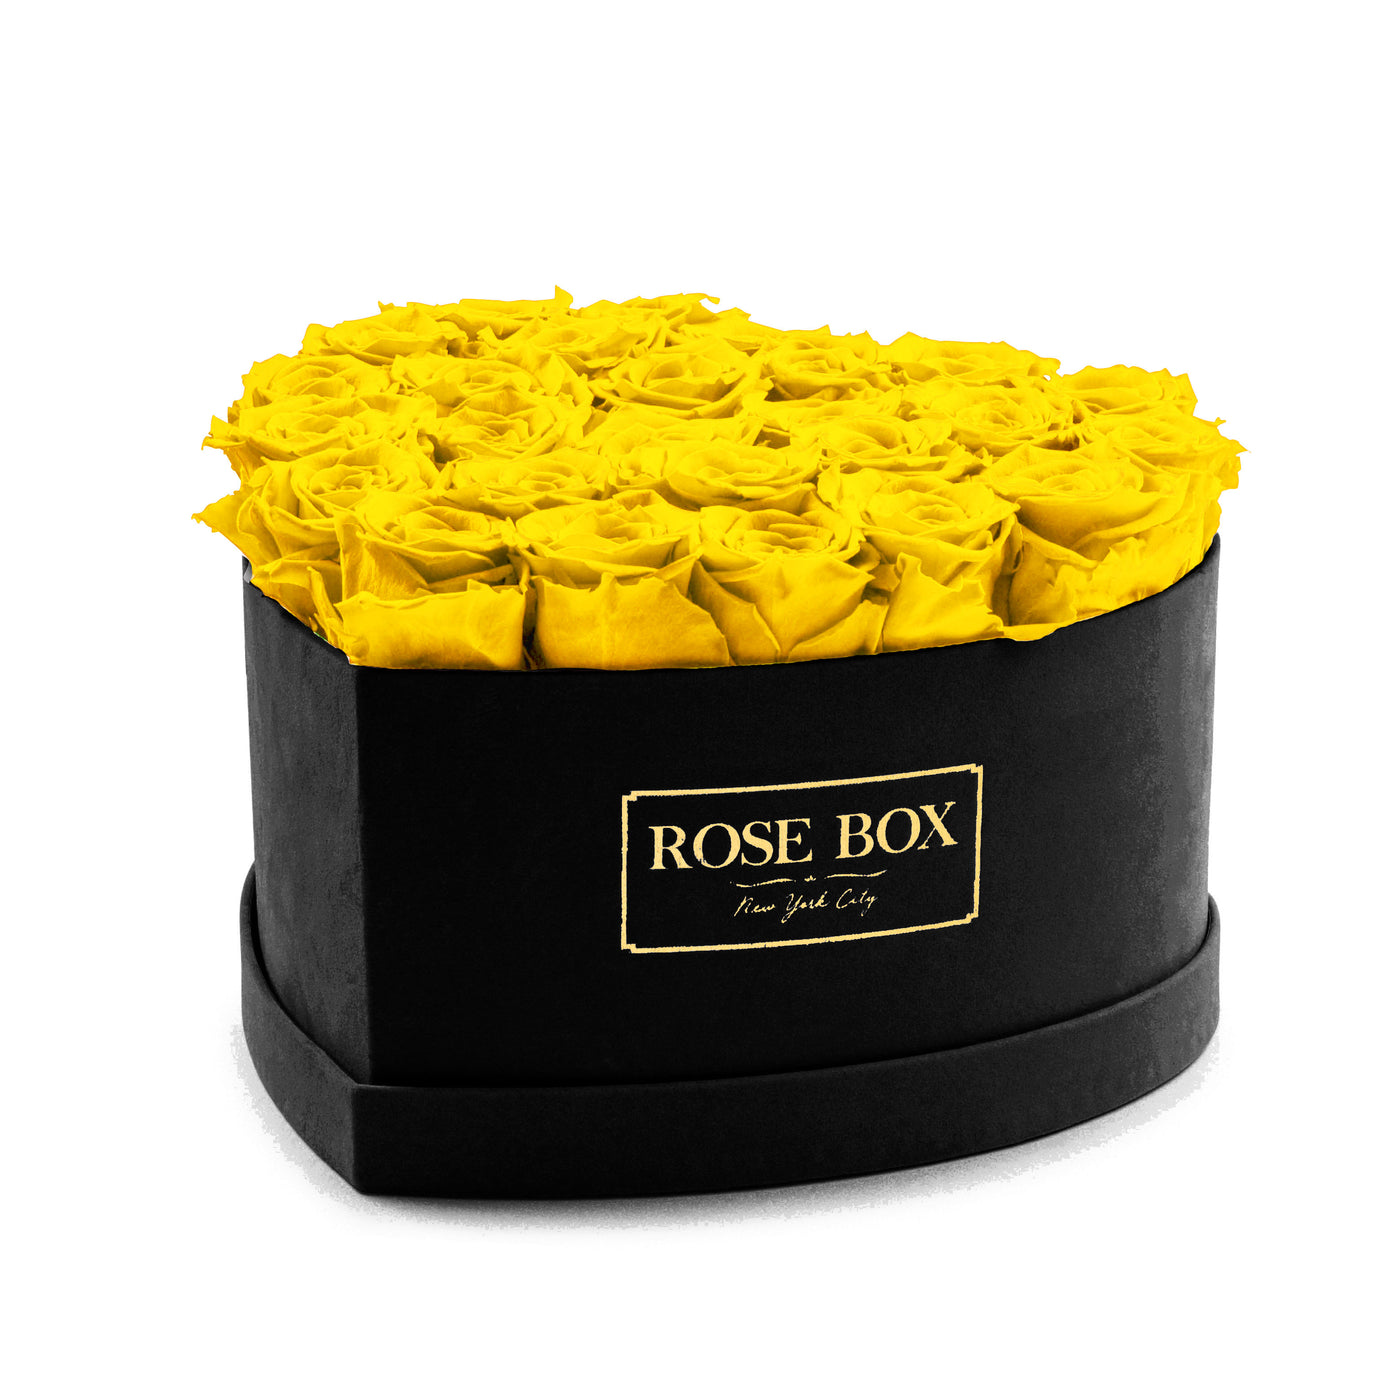 Large Black Heart Box with Bright Yellow Roses